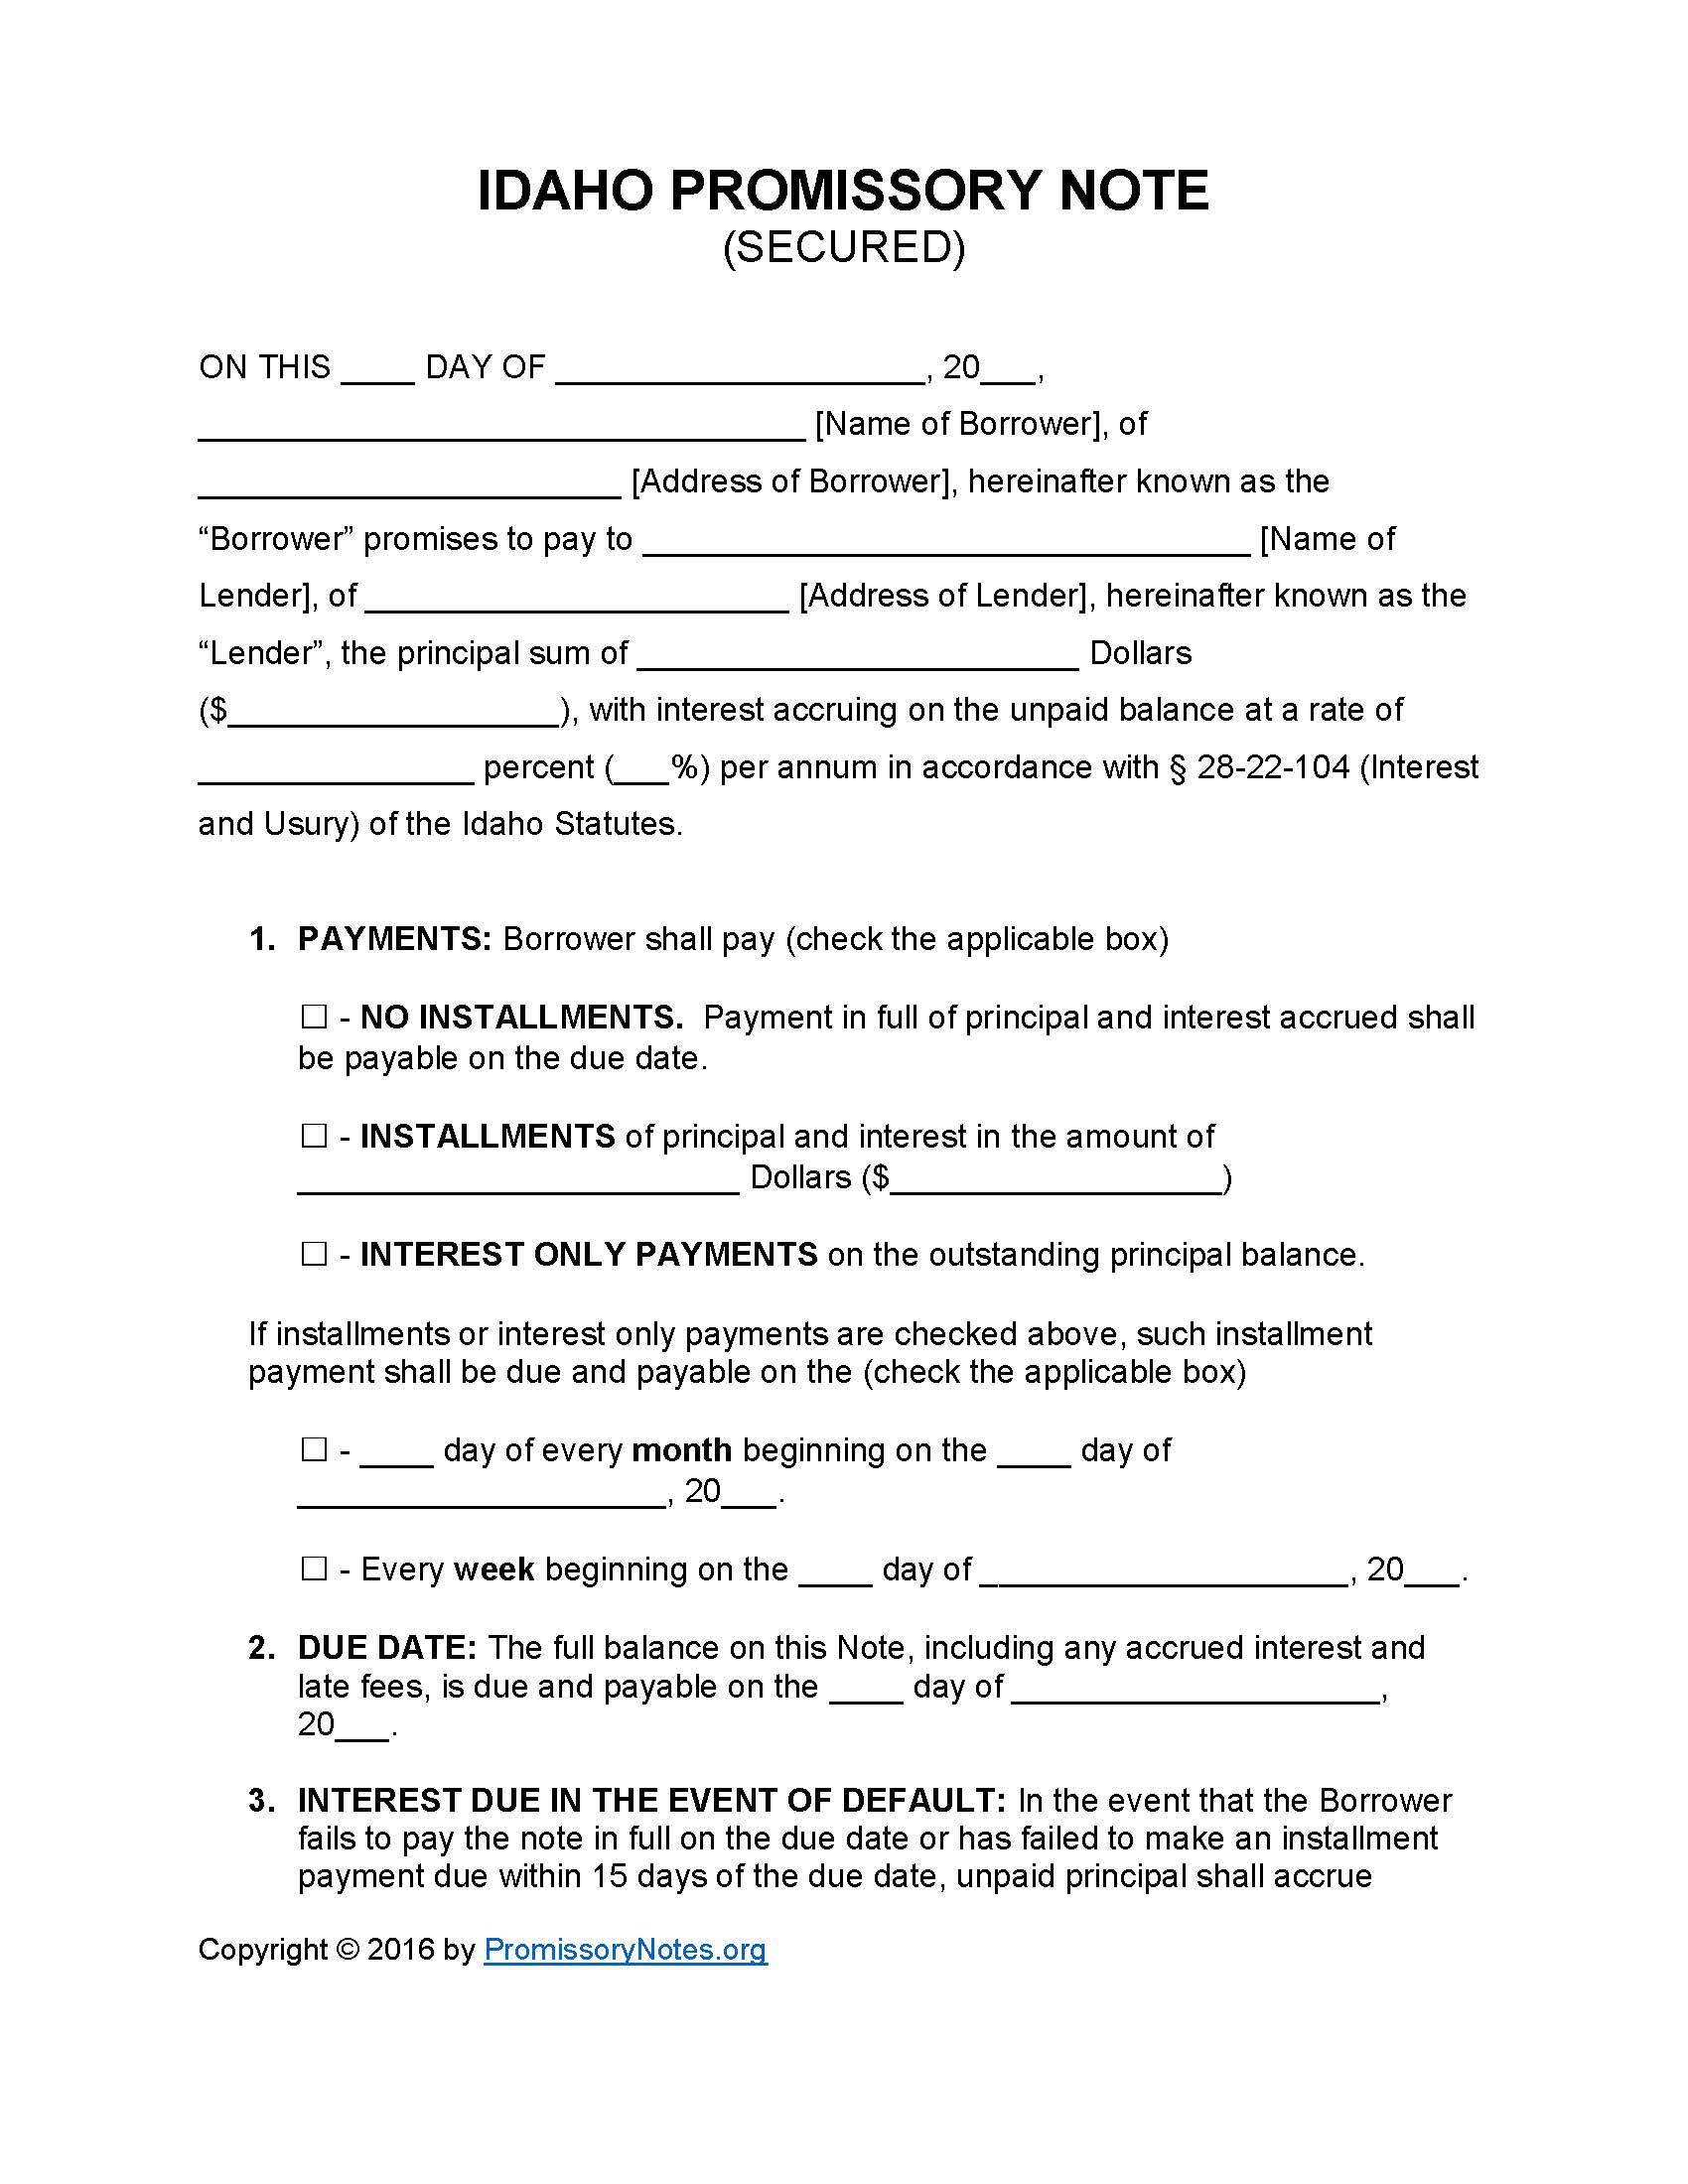 idaho-secured-promissory-note-form